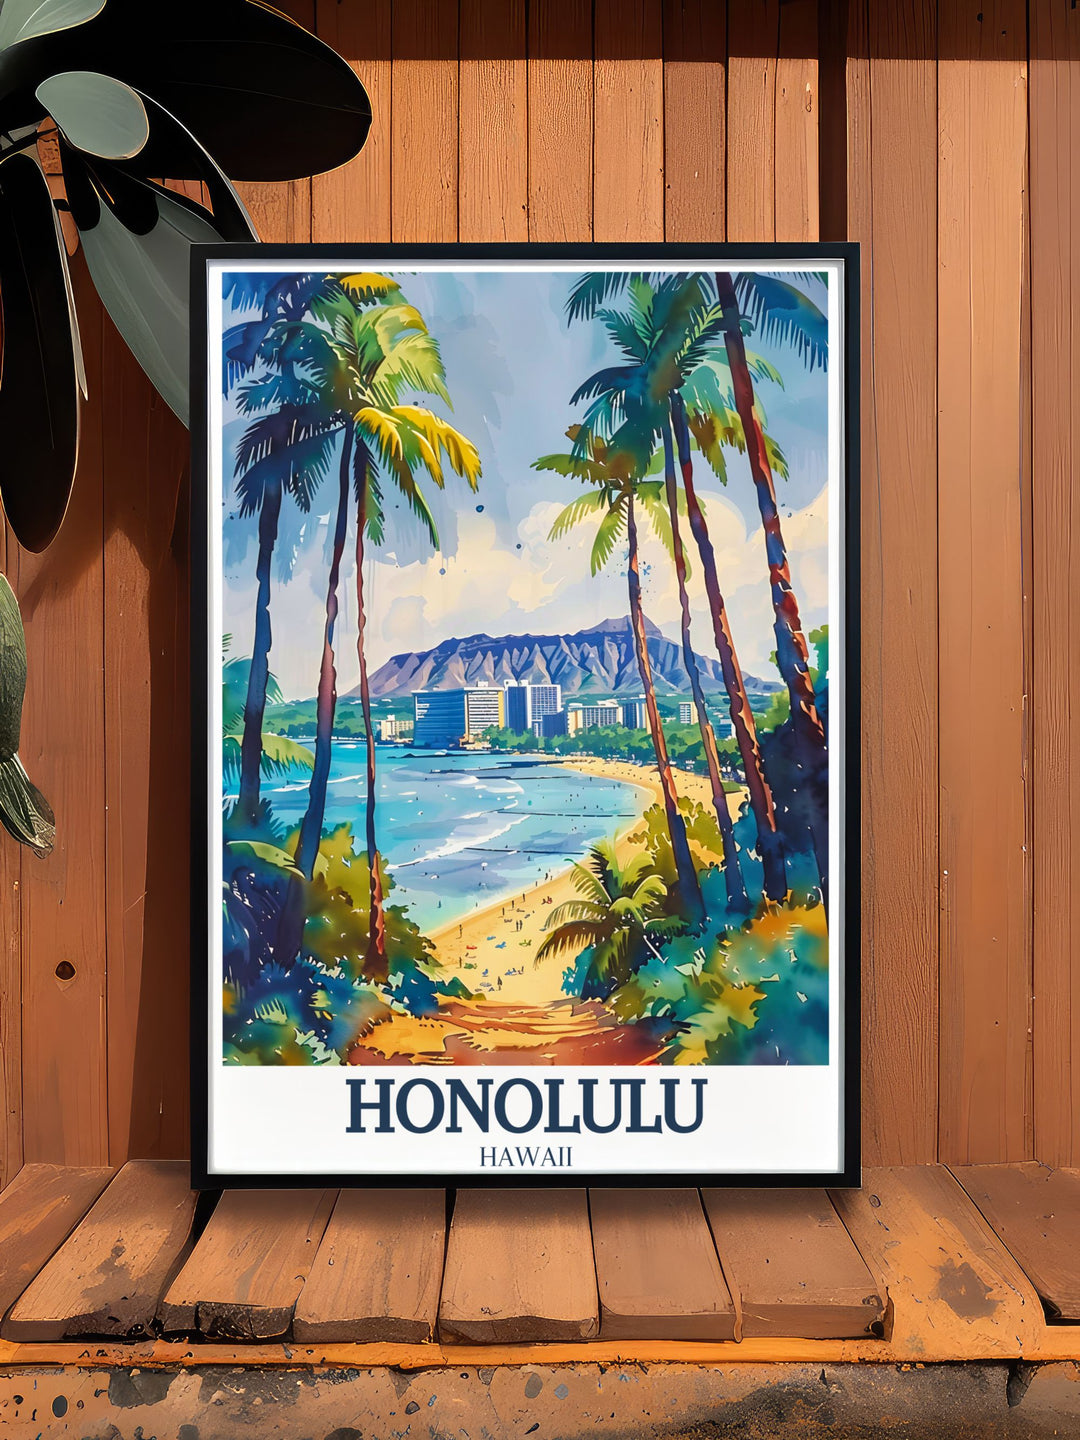 Fine art print of Waikiki Beach in Honolulu, Hawaii, capturing the beachs lively atmosphere, crystal clear waters, and picturesque surroundings. This artwork offers a beautiful depiction of one of Hawaiis most beloved destinations.